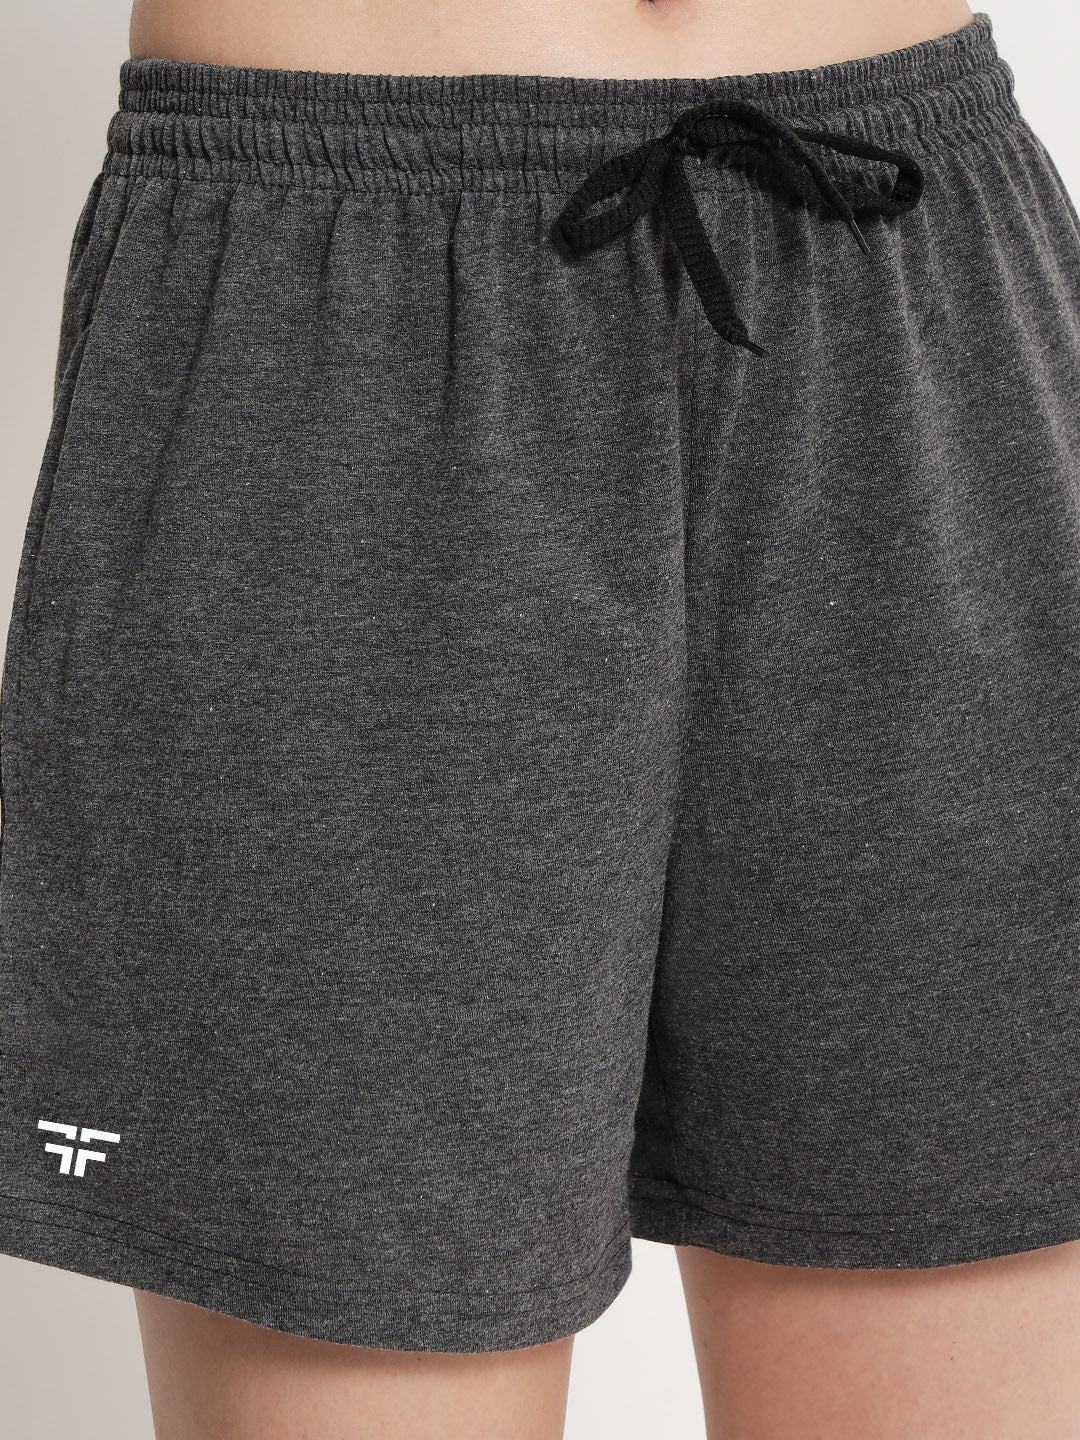 Charcoal Grey Color Solid Shorts